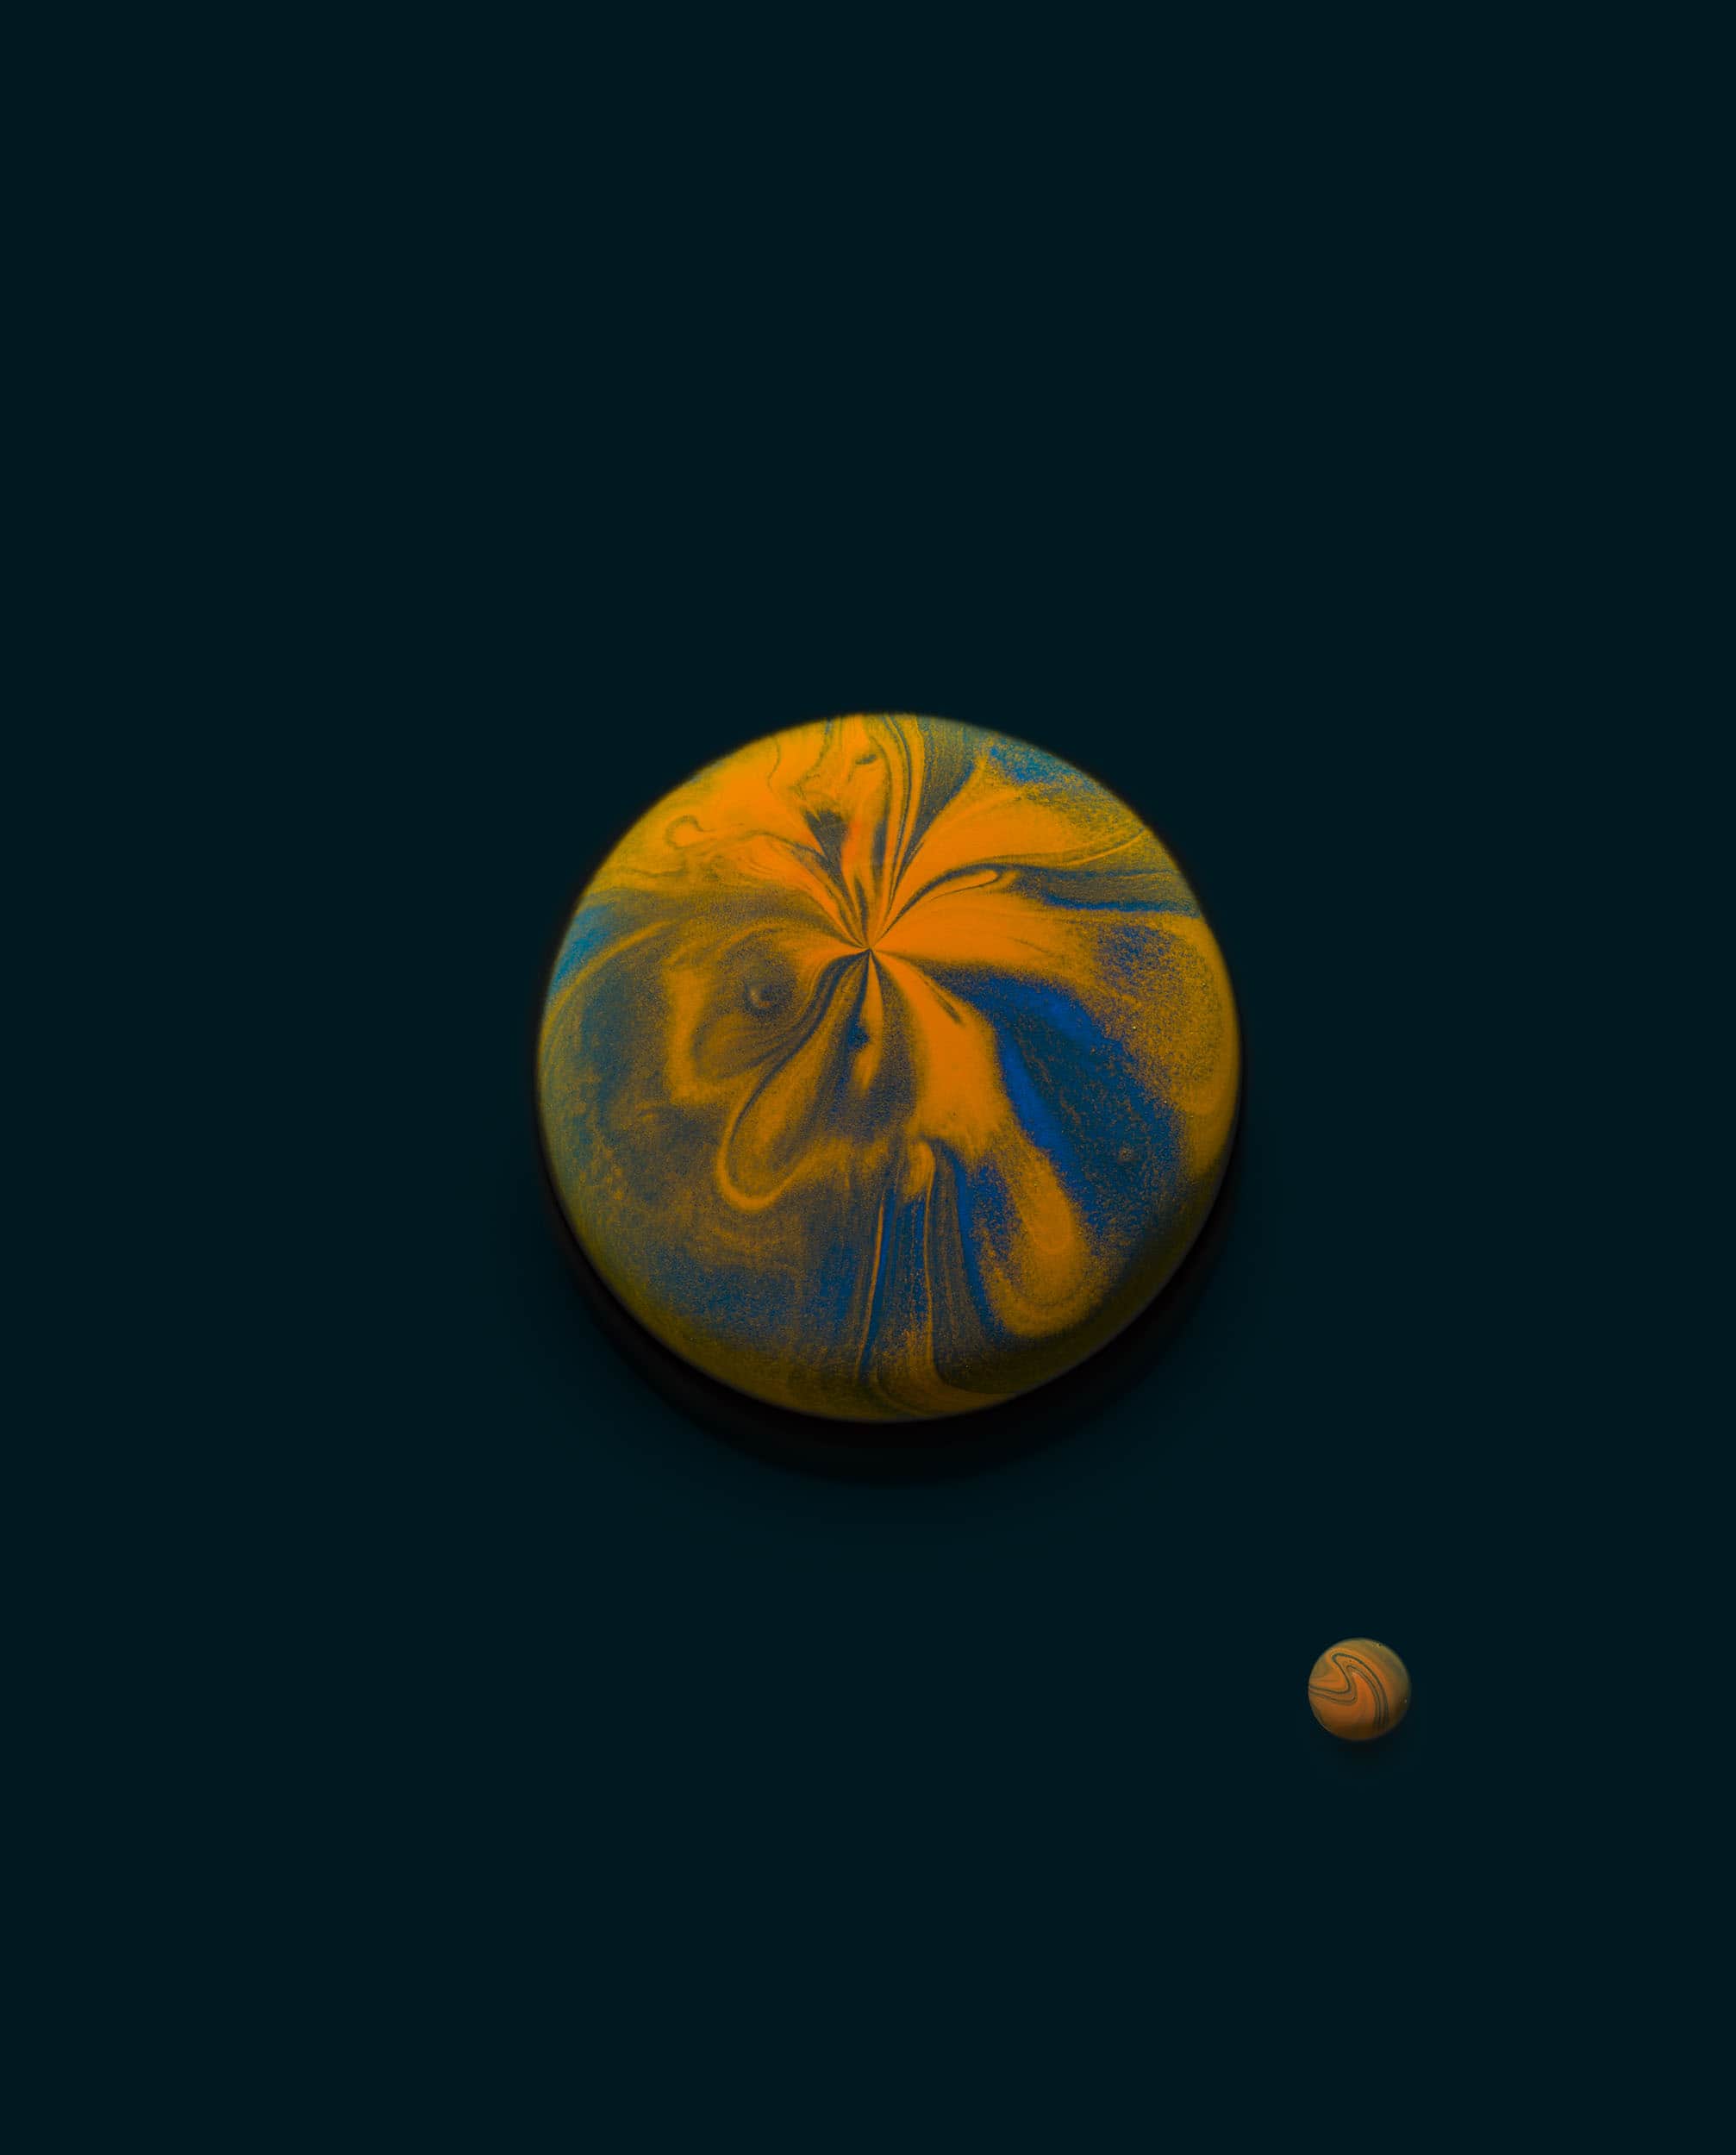 A mixture of orange and blue paint creating a marbled effect is shaped into a large spherical bubble, with a smaller one to accompany, on a black background. This looks like a planet with a moon orbiting it.